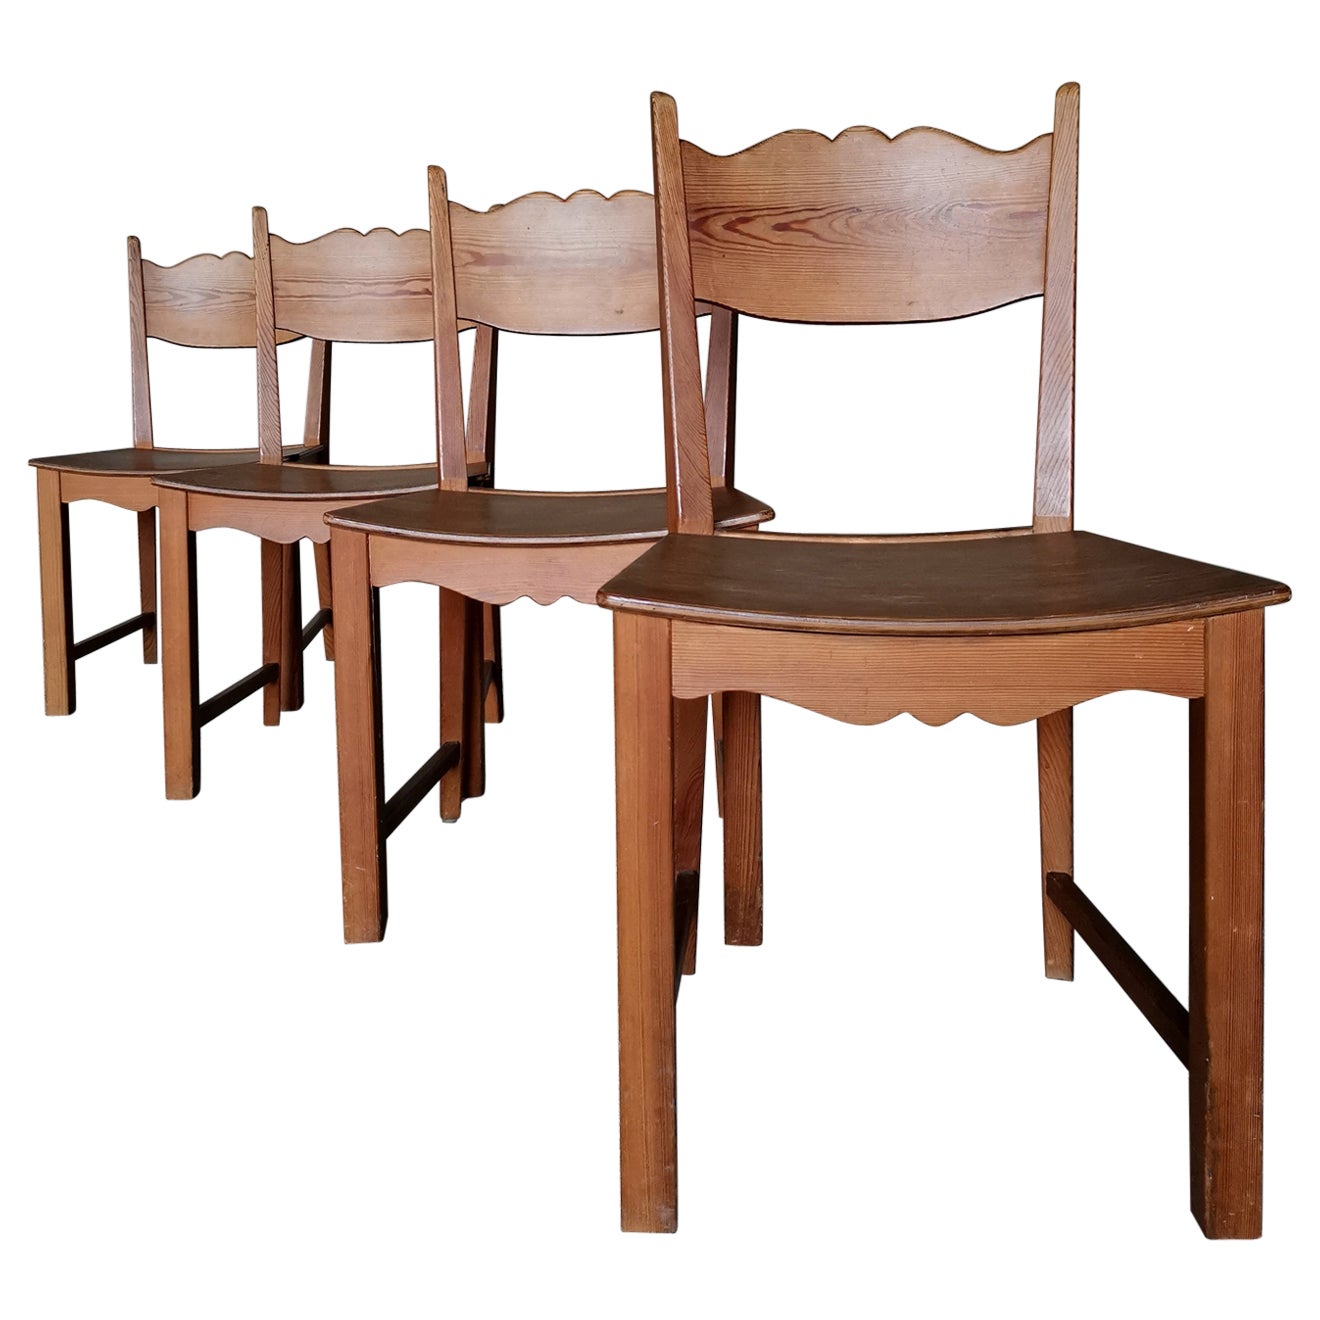 Set of 4 Swedish 1930s dining chairs in solid pine, style of Axel Einar Hjorth  For Sale